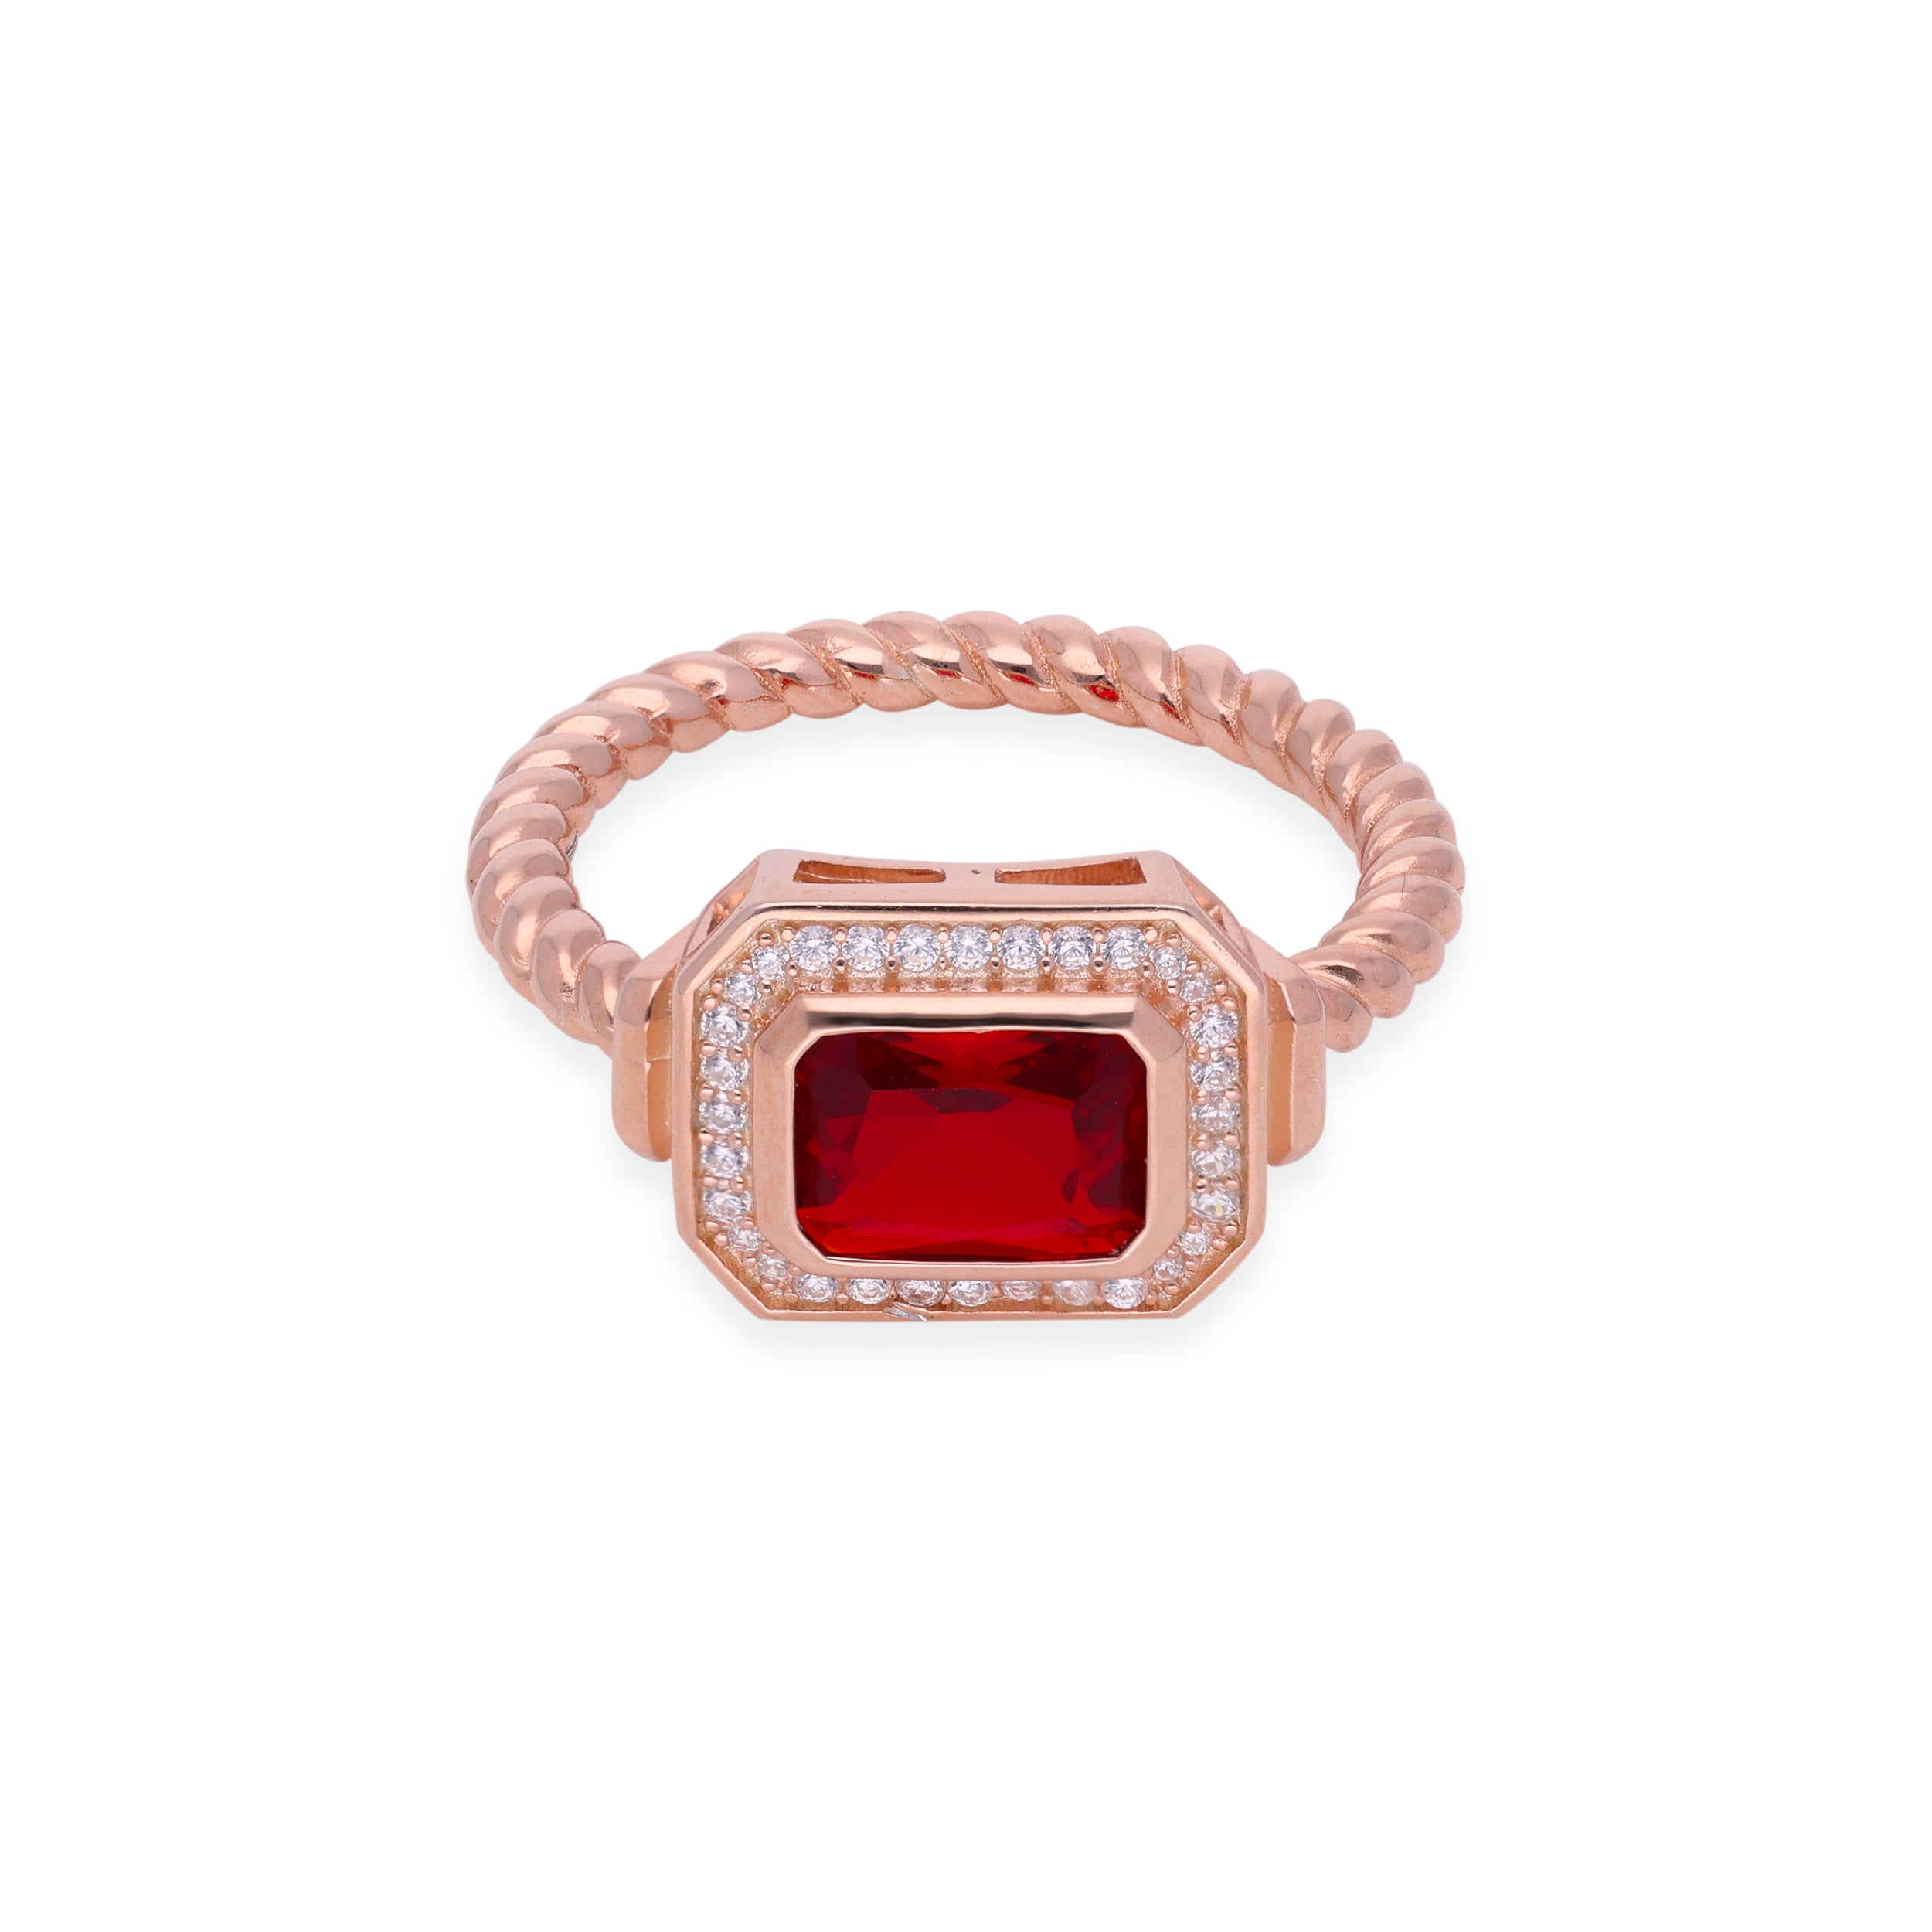 Rose Gold Twisted Band Ring with Red Gemstone and Diamond Halo | SKU : 0003114766